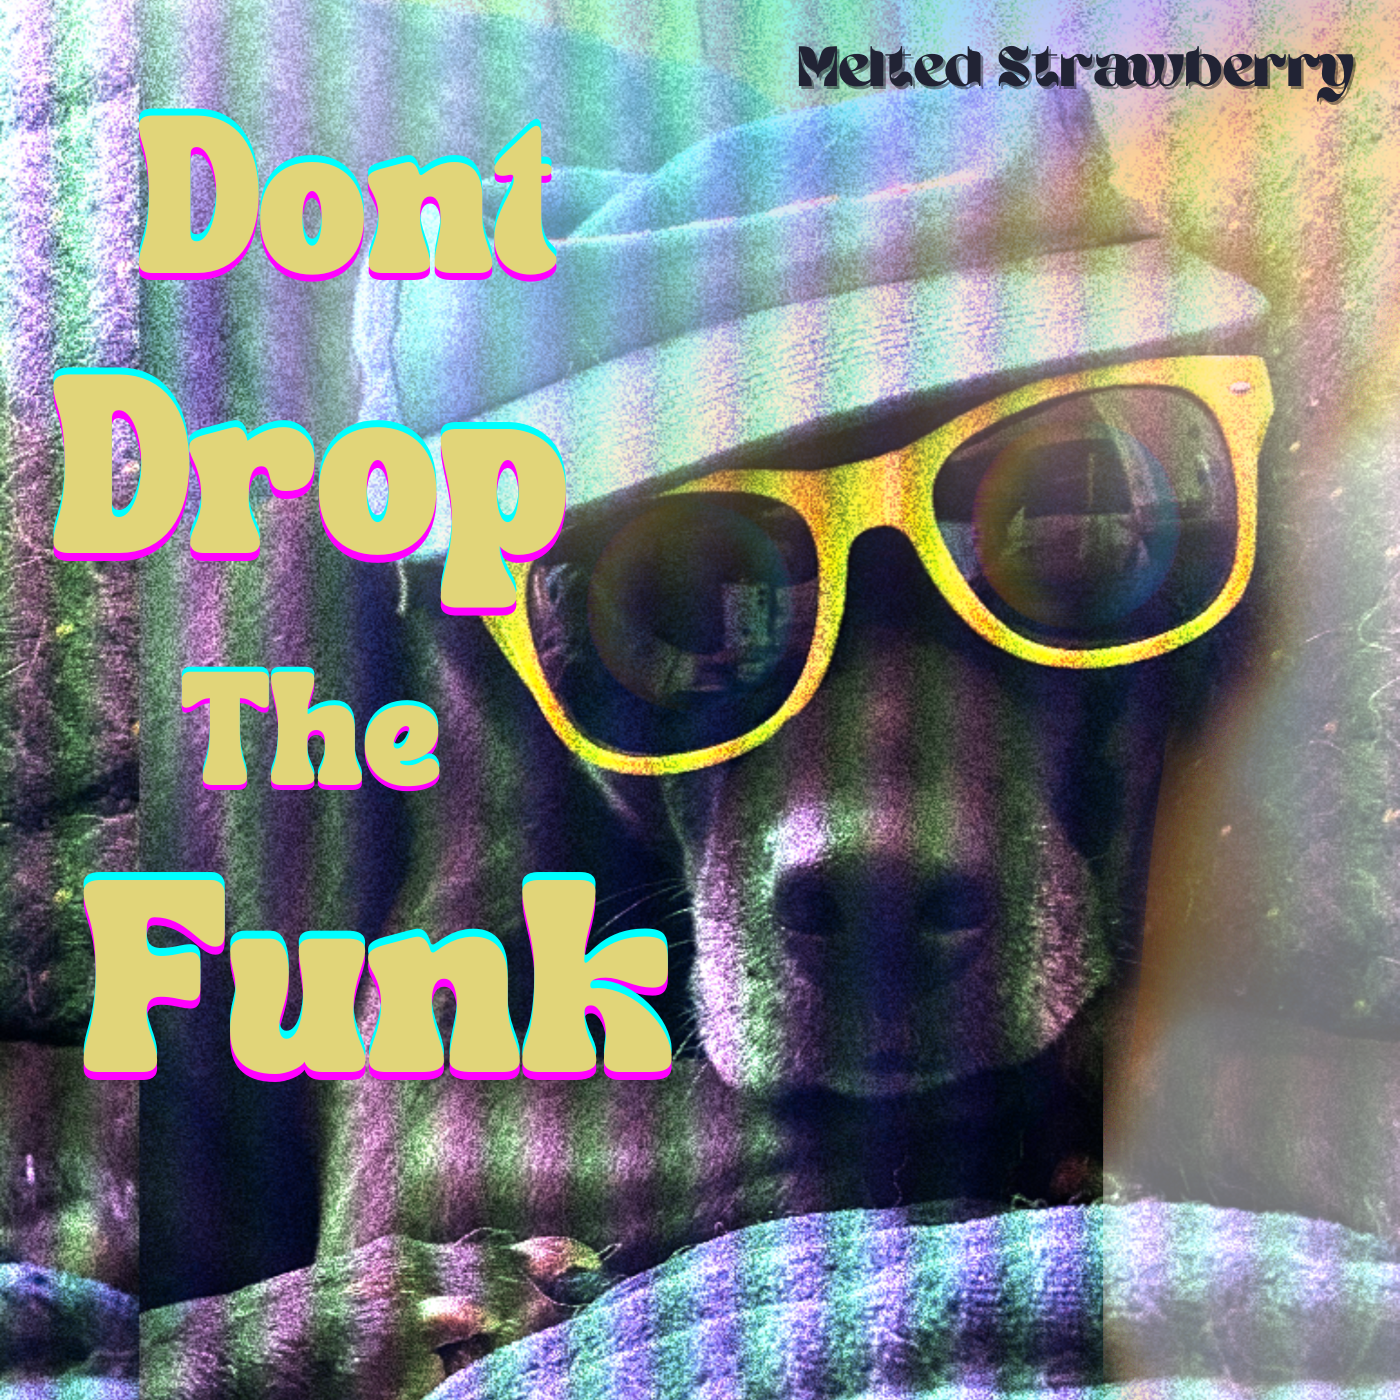 Melted Strawberry - Don't Drop the Funk